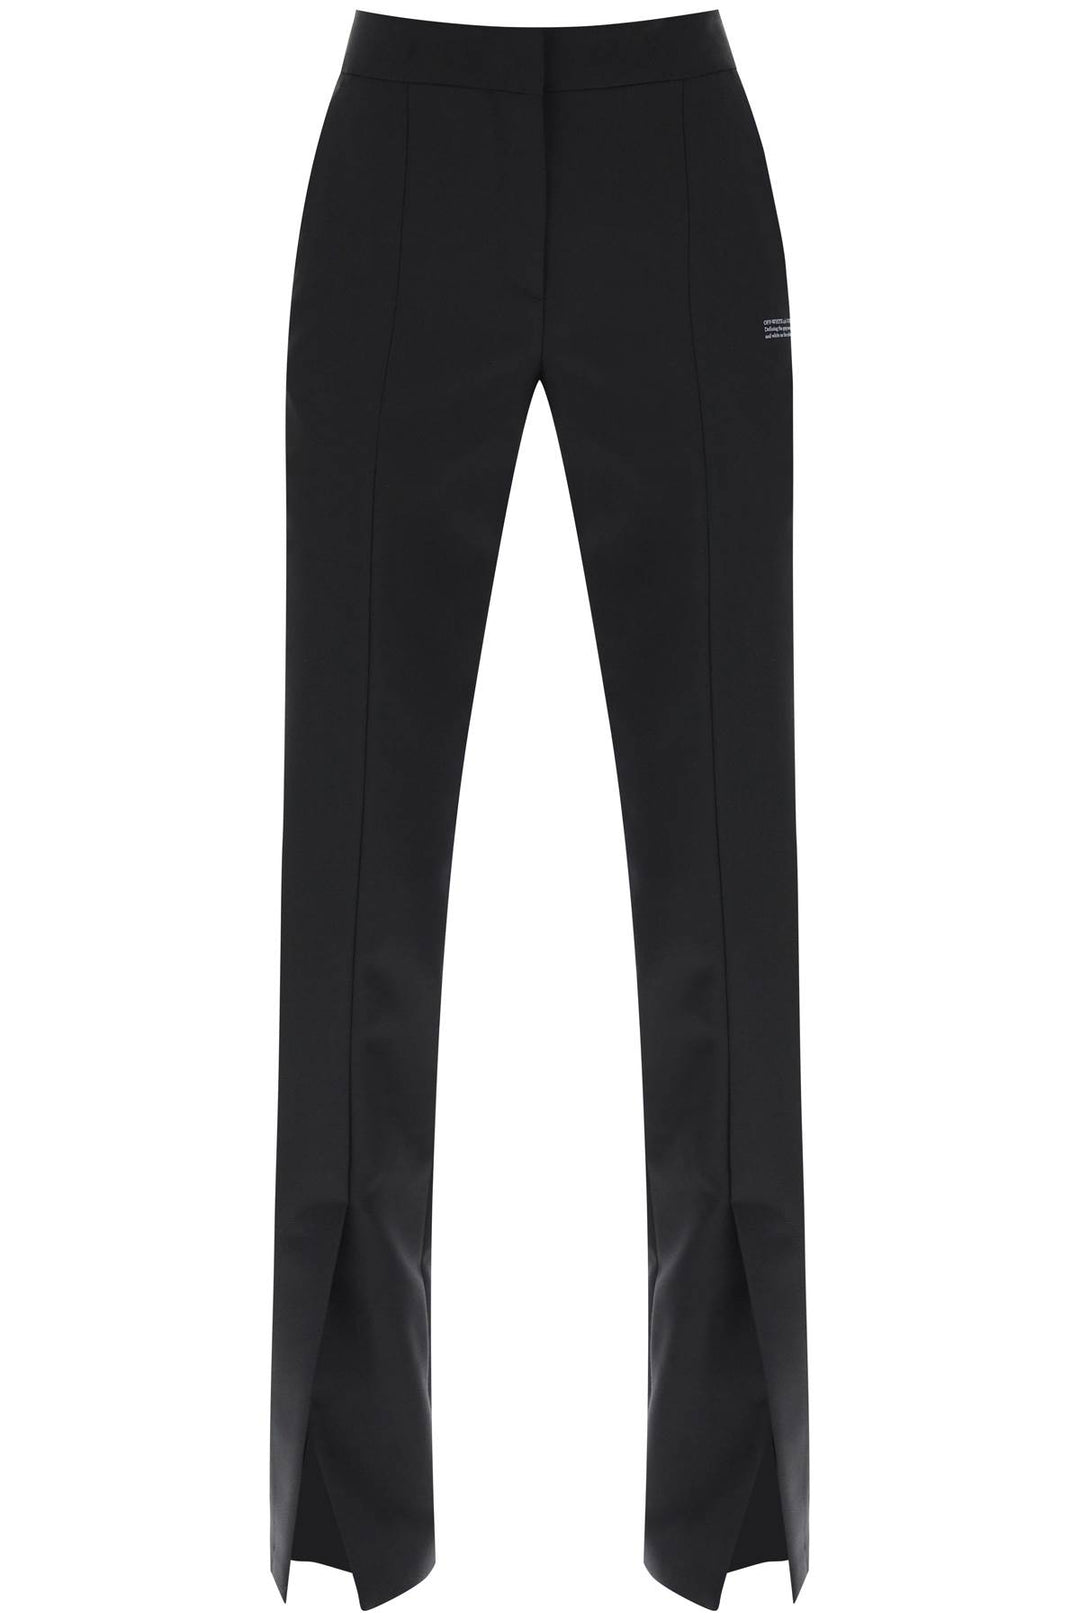 Off-white corporate tailoring pants-0